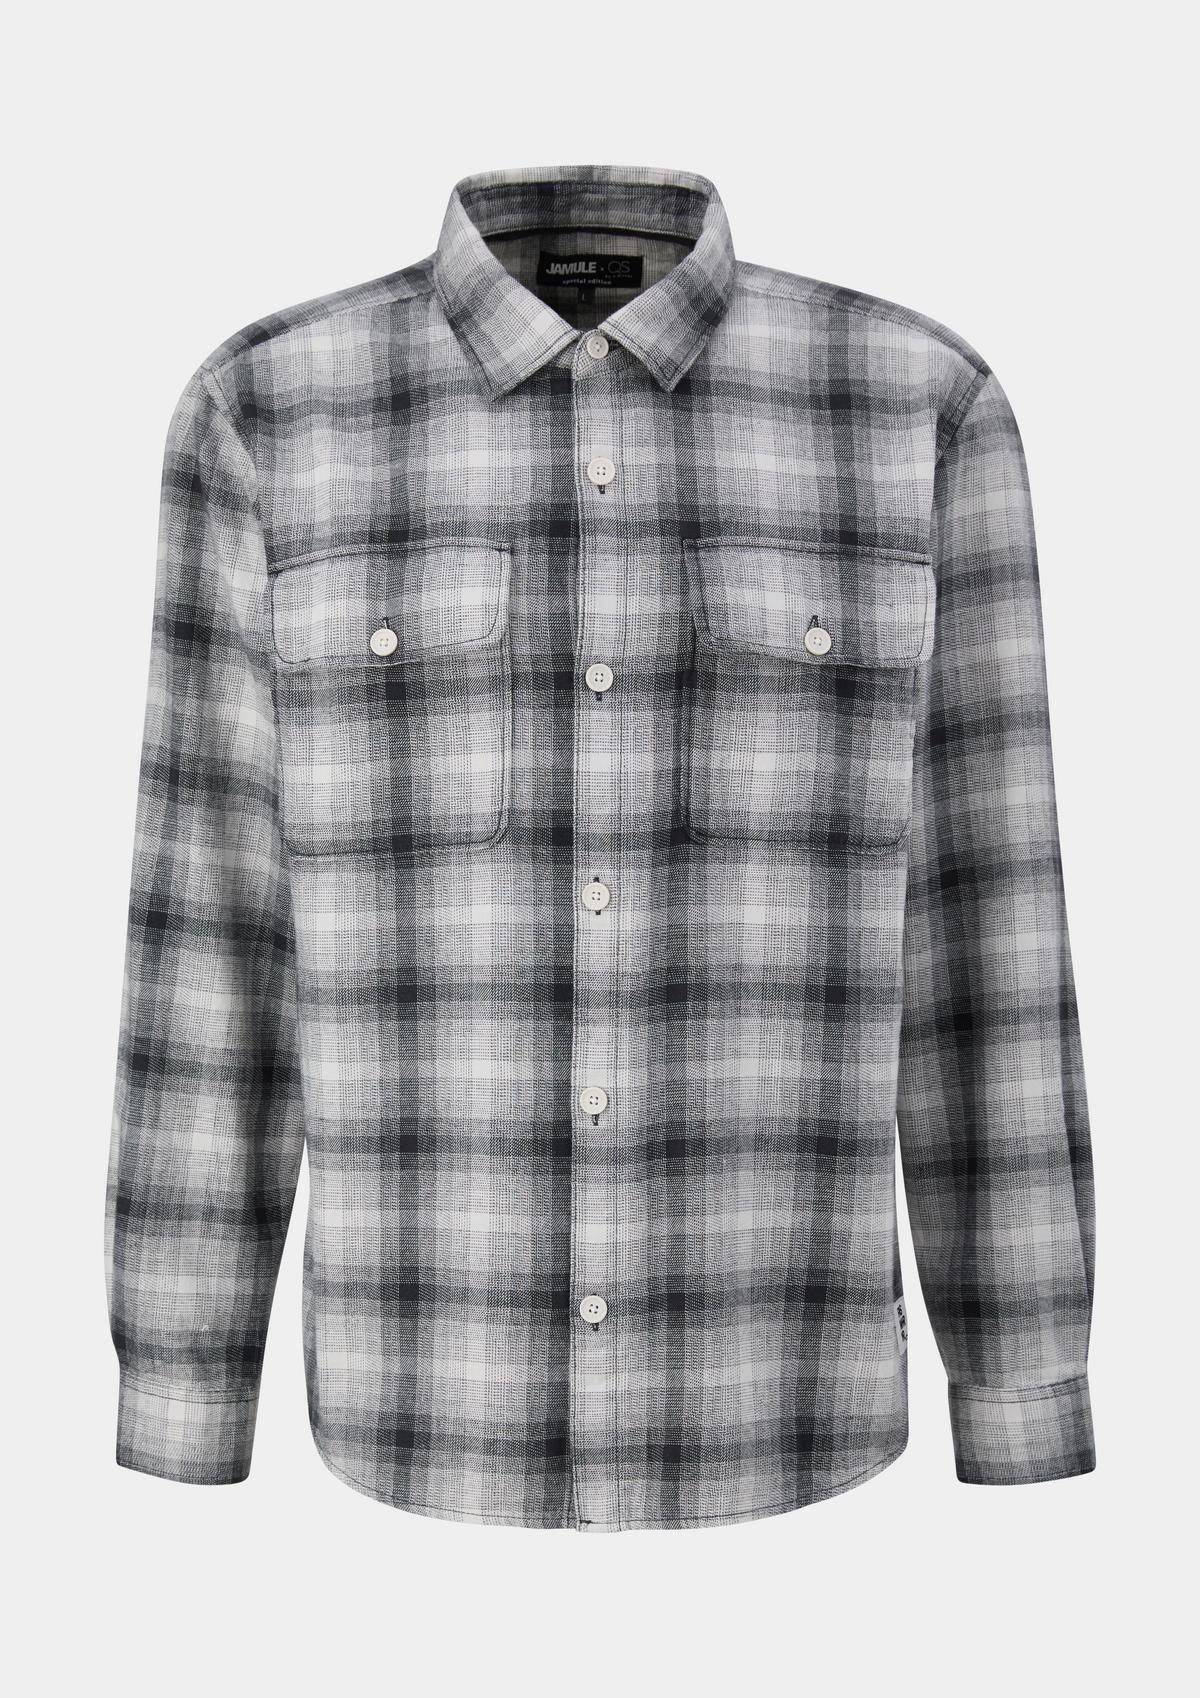 s.Oliver QS x JAMULE flannel shirt with a check pattern